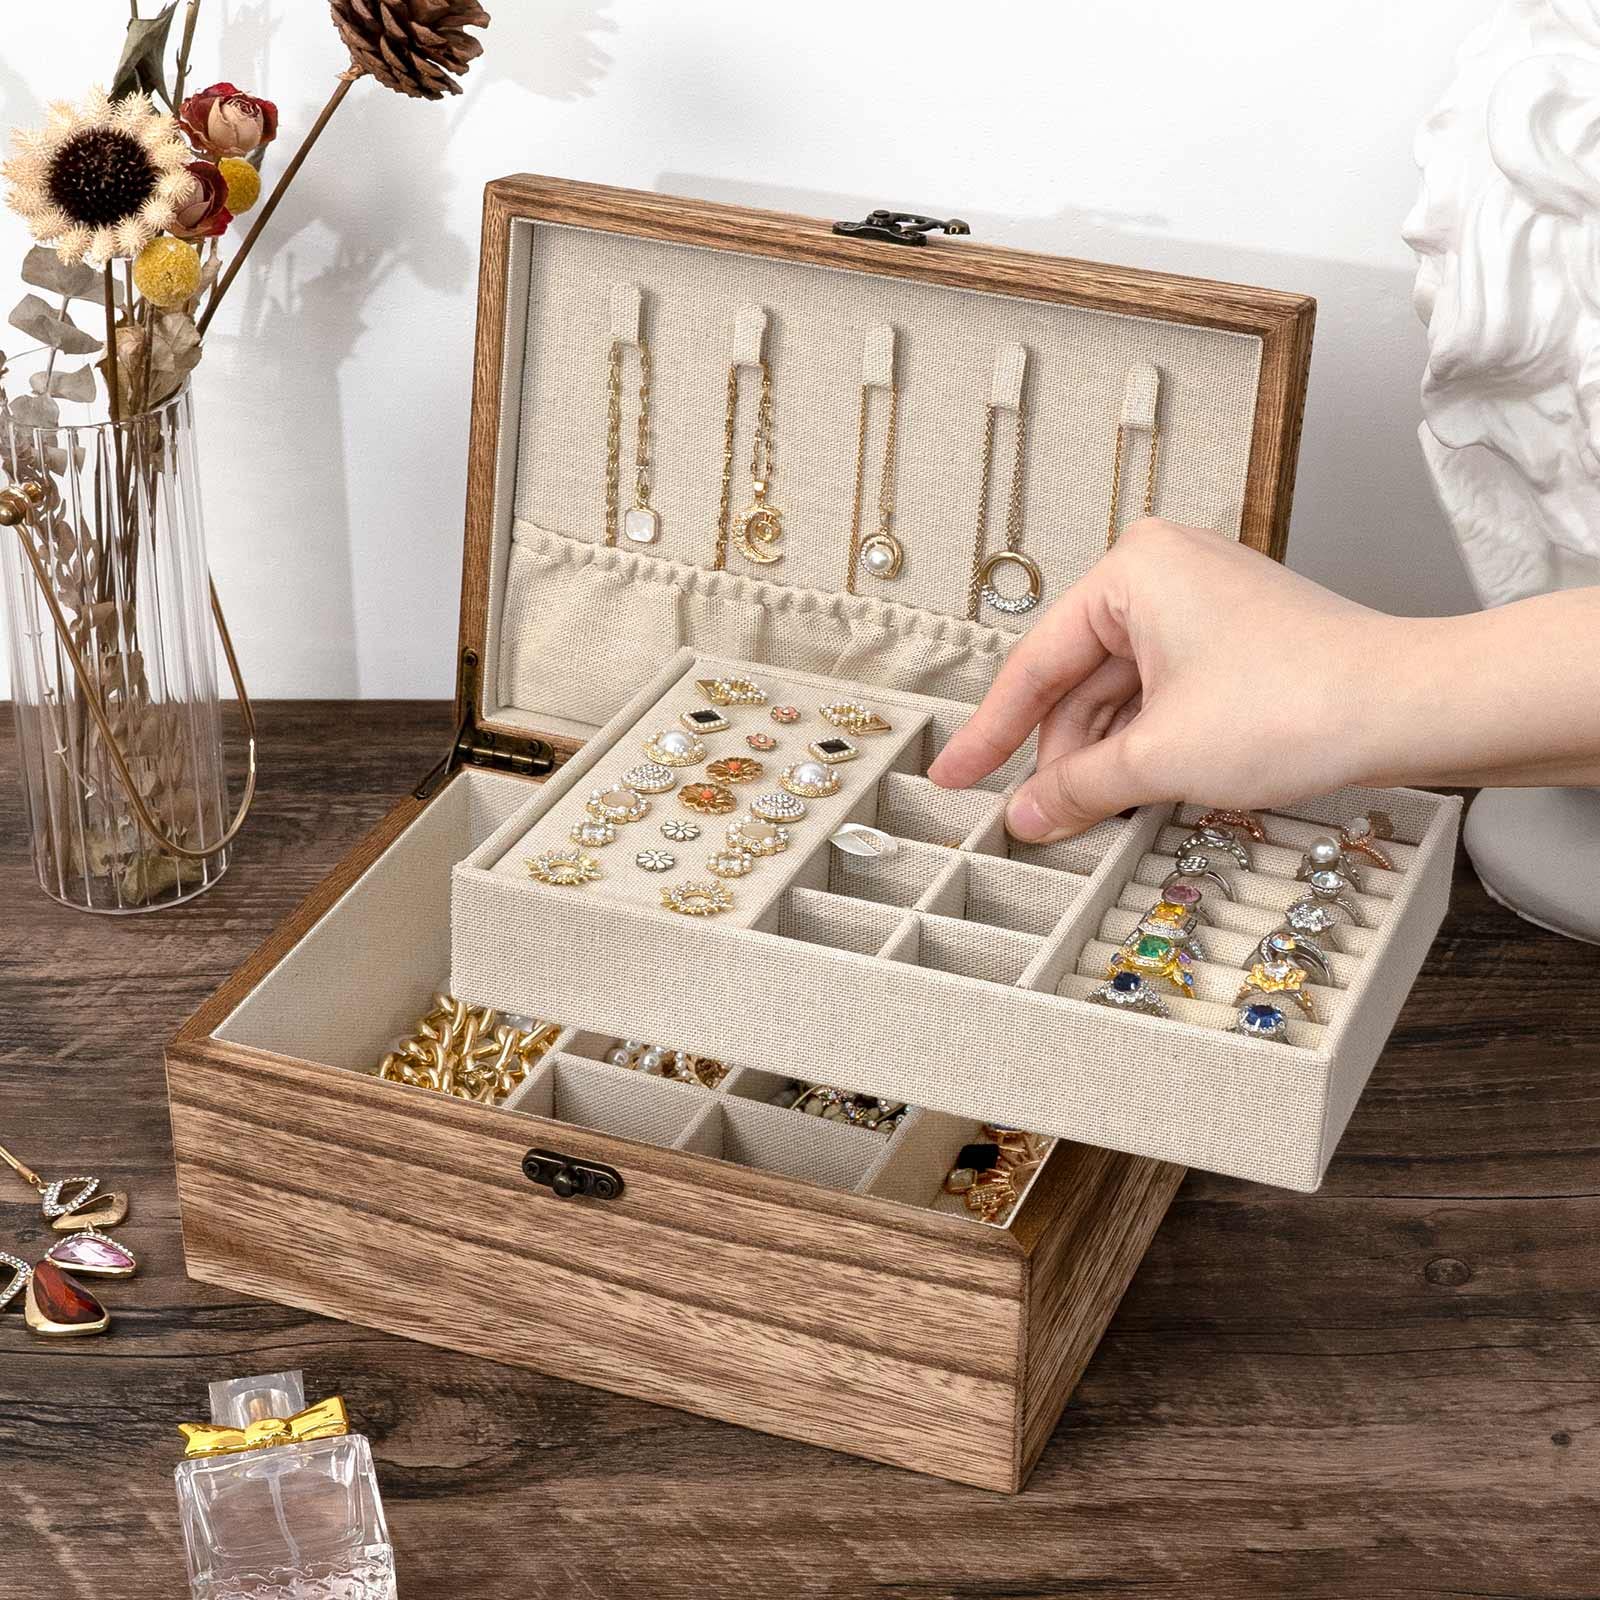 Double Layer Jewelry Organizer Box Solid Wood Jewelry Boxes Rustic Style Small Jewelry Box